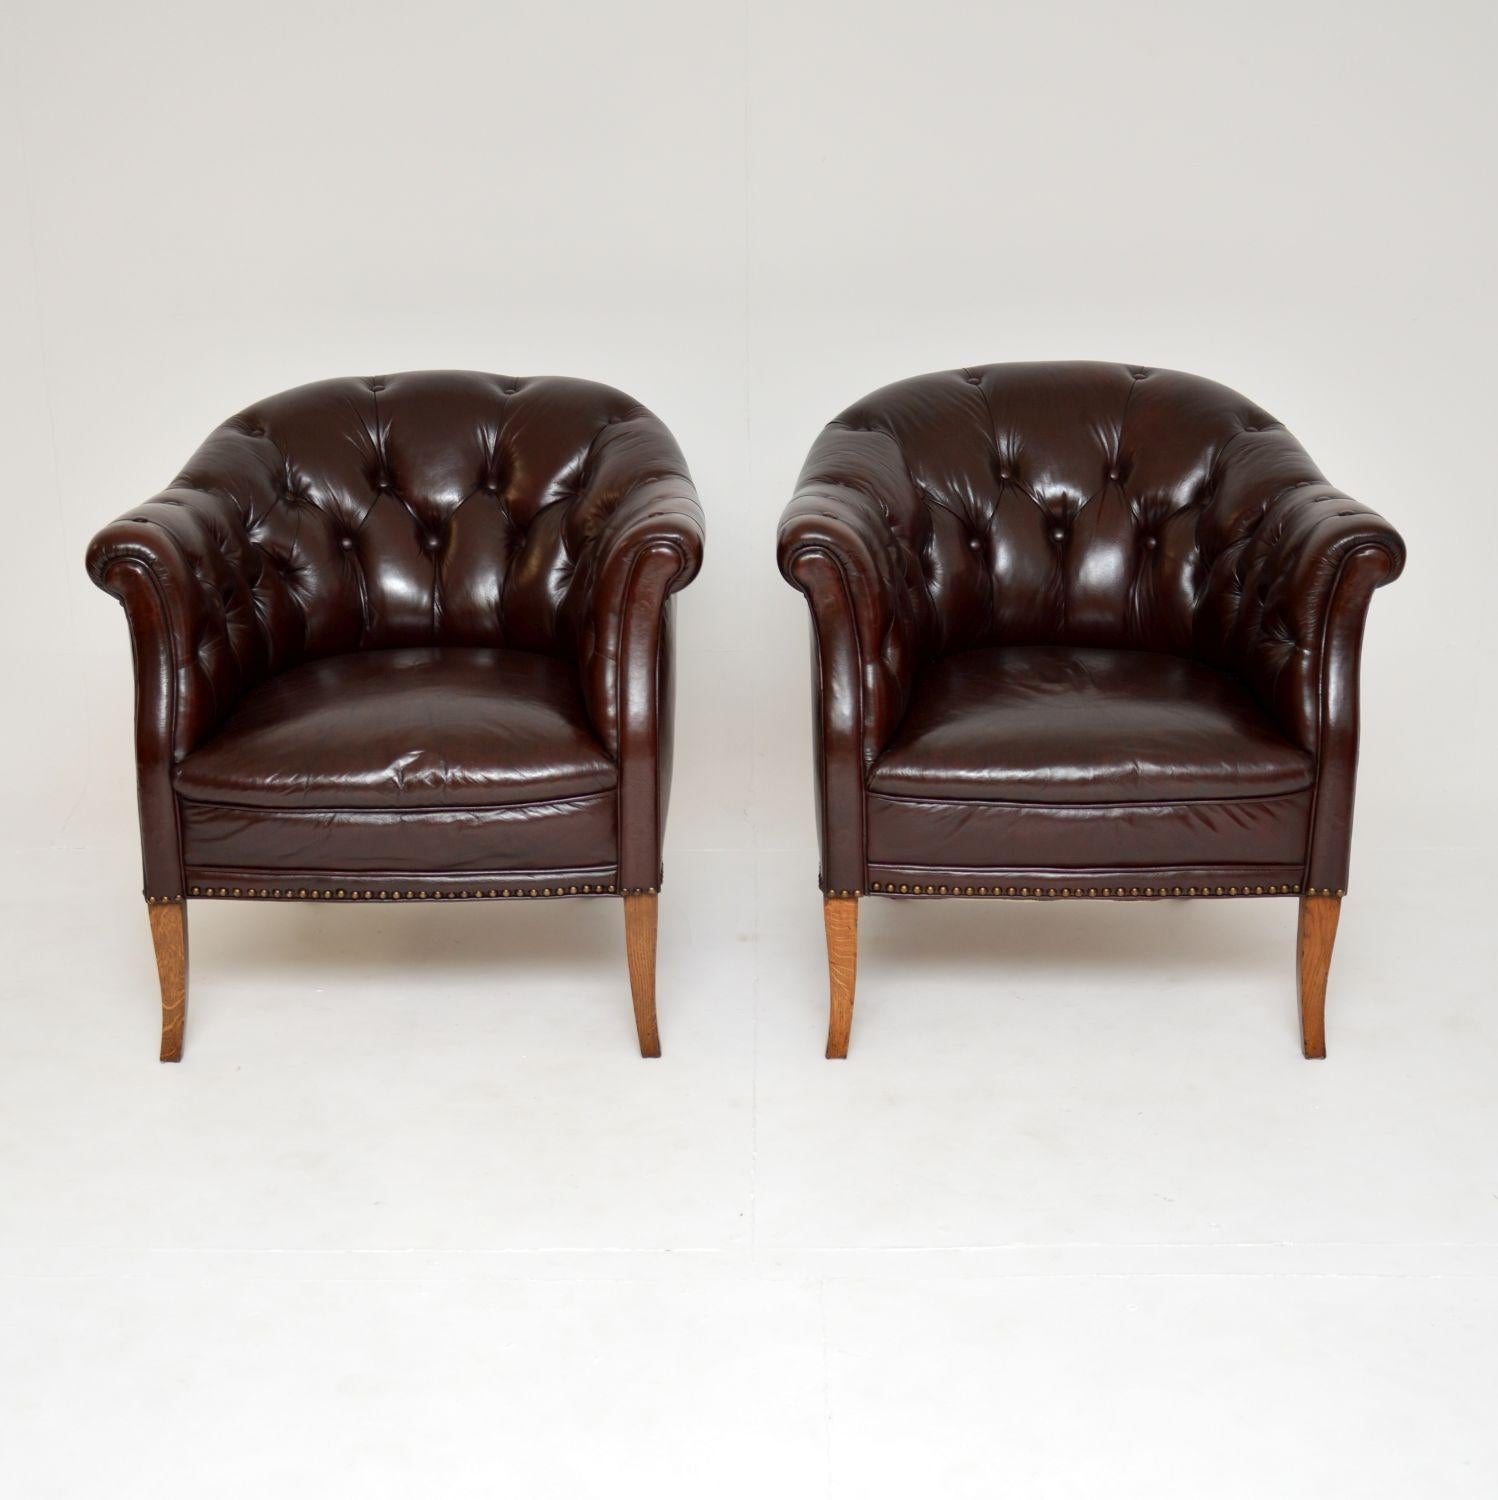 A beautiful and very comfortable pair of antique leather club armchairs. They were made in Sweden, and they date from around the 1900-1920 period.

The quality is outstanding, these are upholstered in beautifully soft leather and they sit on